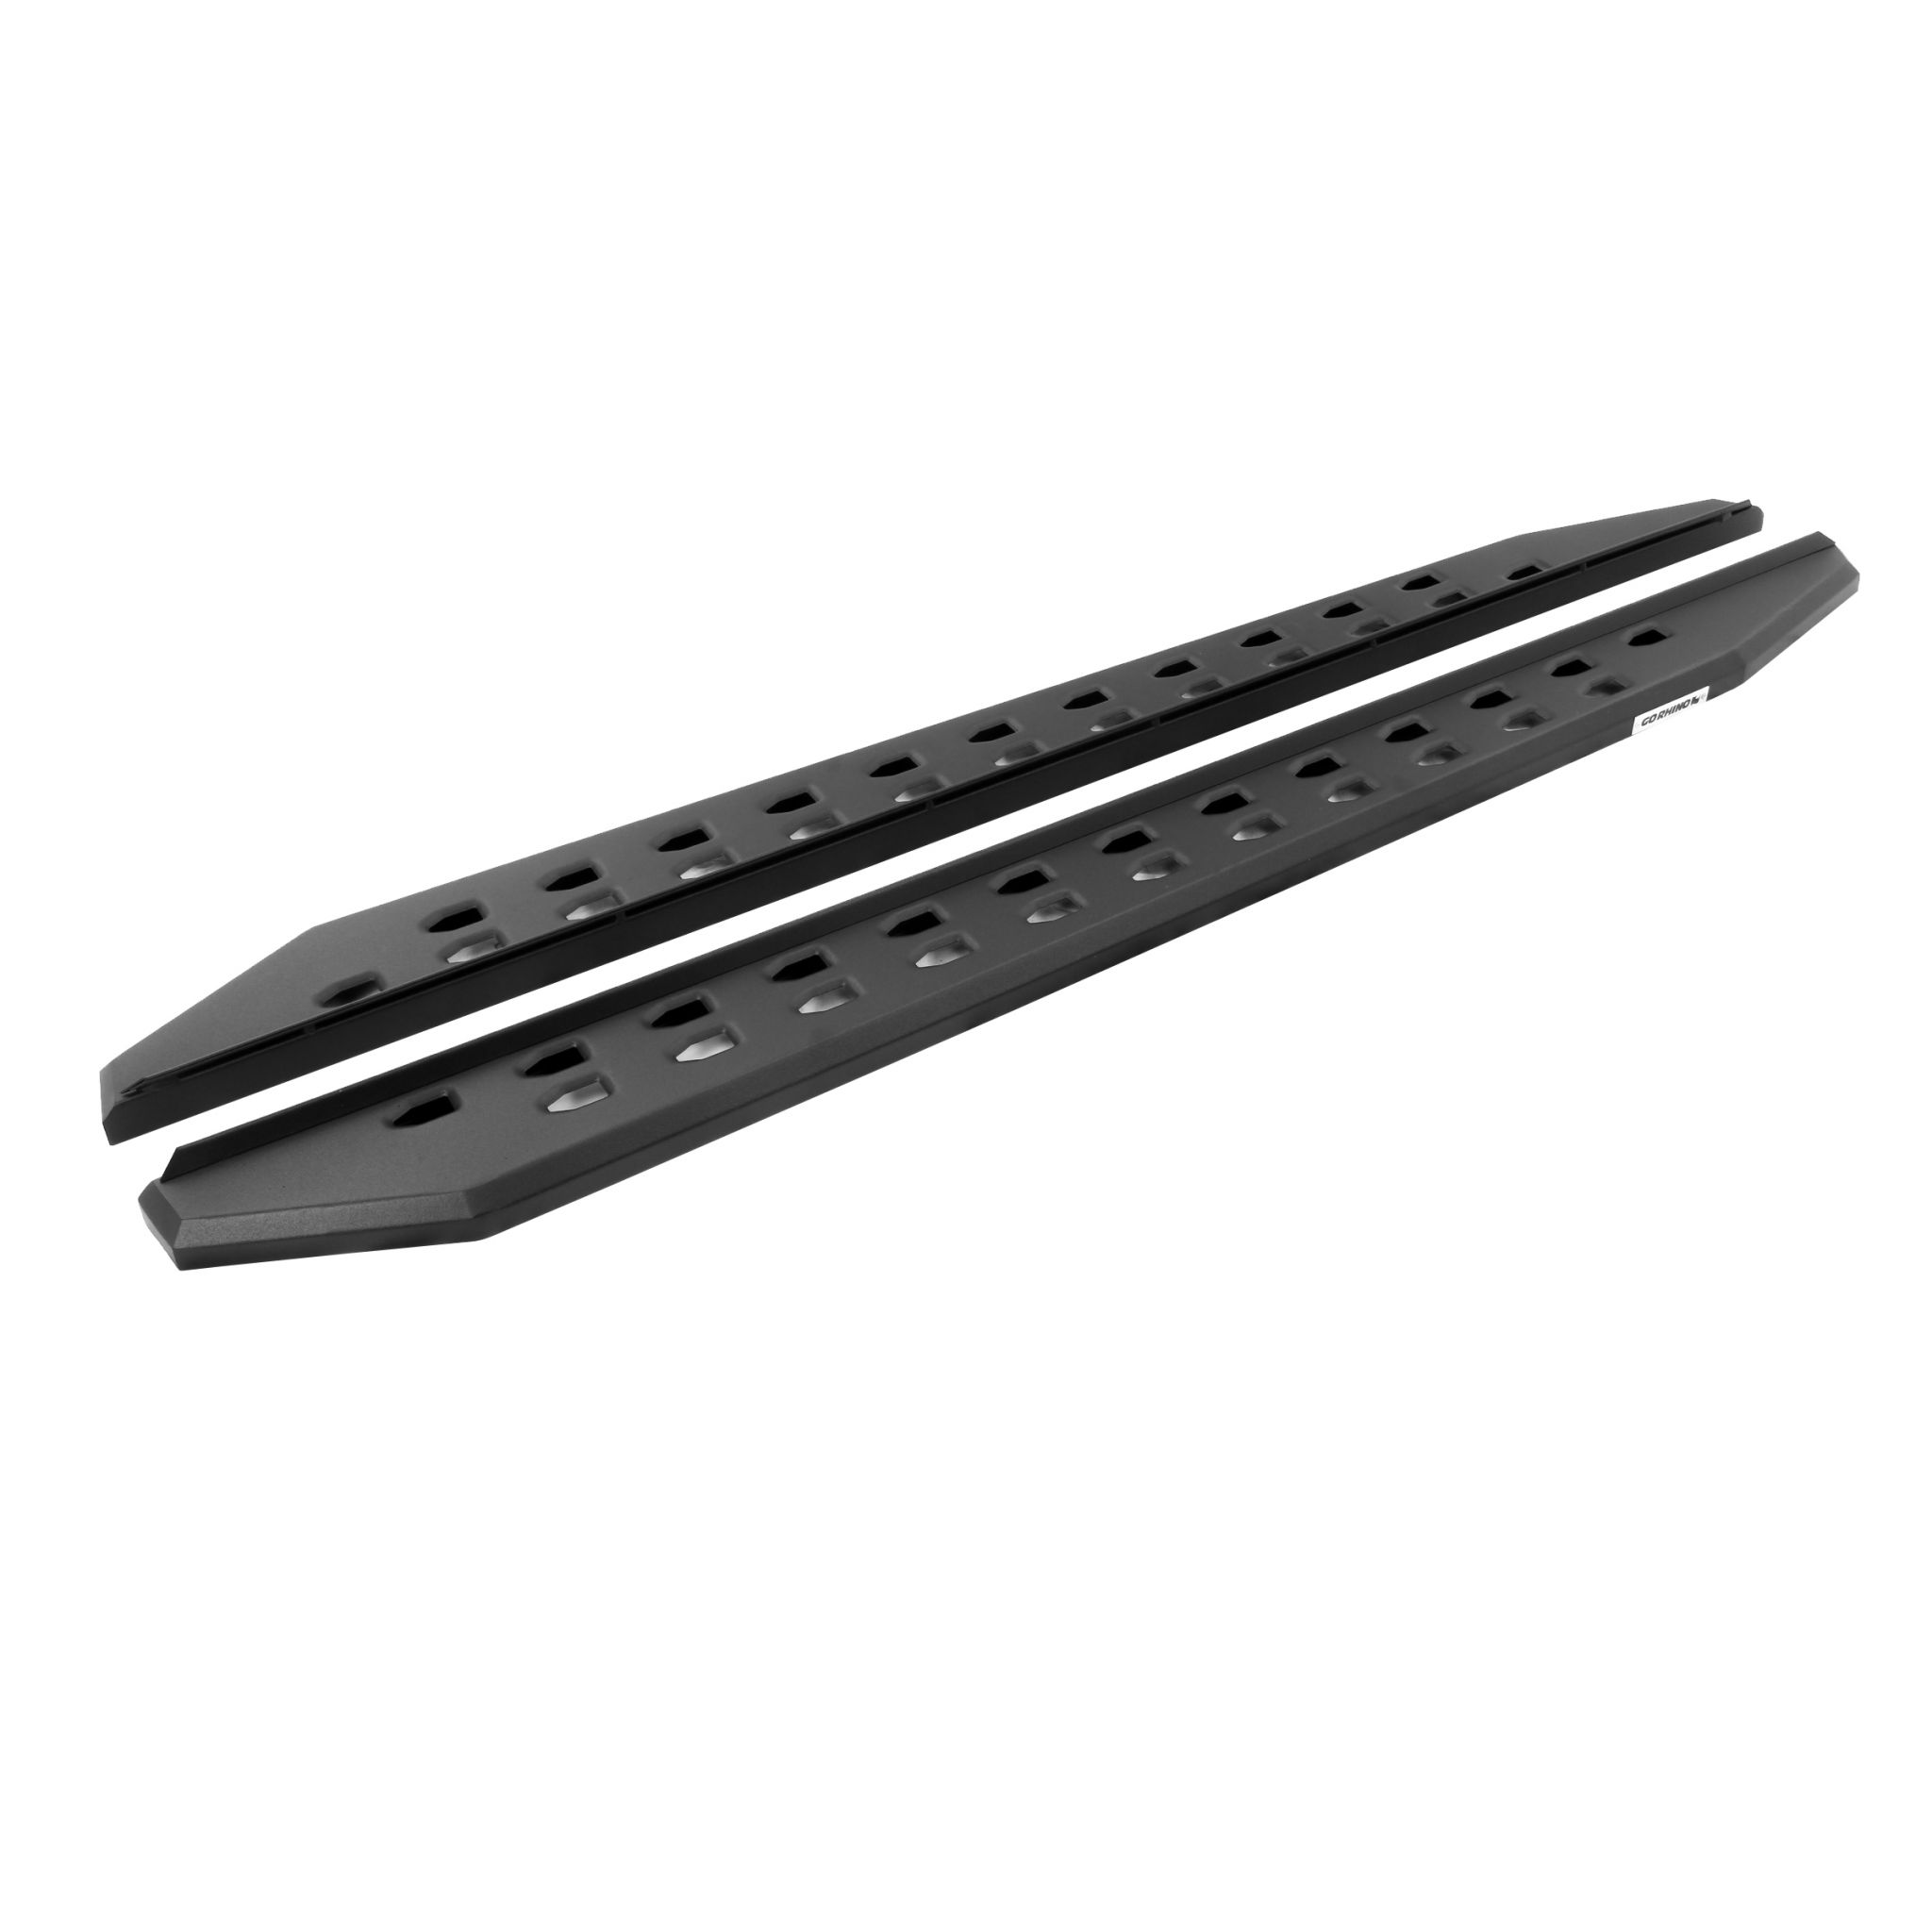 Go Rhino 69400068ST - RB20 Slim Line Running Boards  - BOARDS ONLY - Protective Bedliner Coating